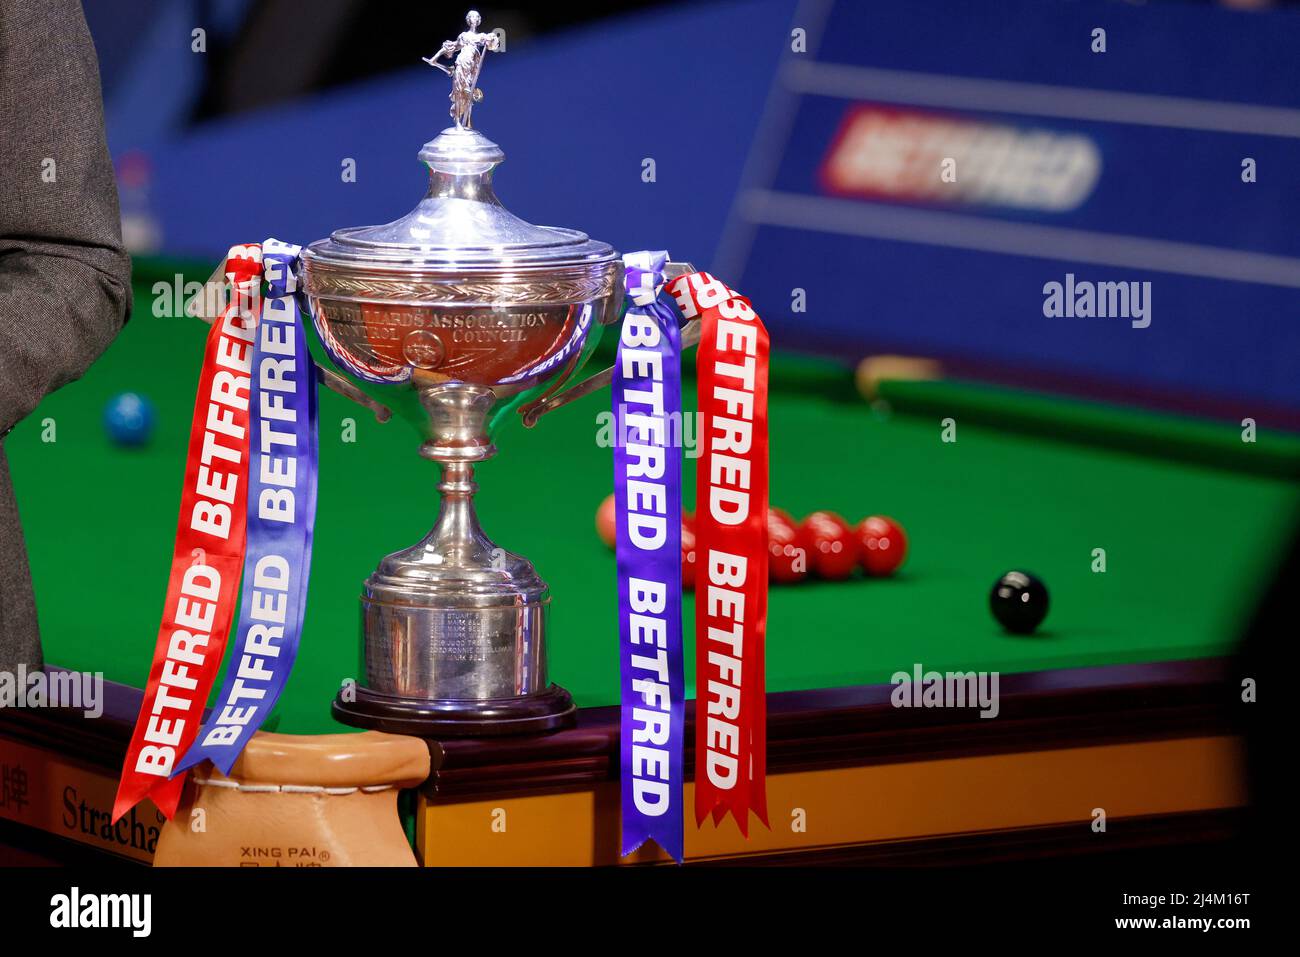 The Betfred World Snooker Championship trophy at The Crucible, Sheffield